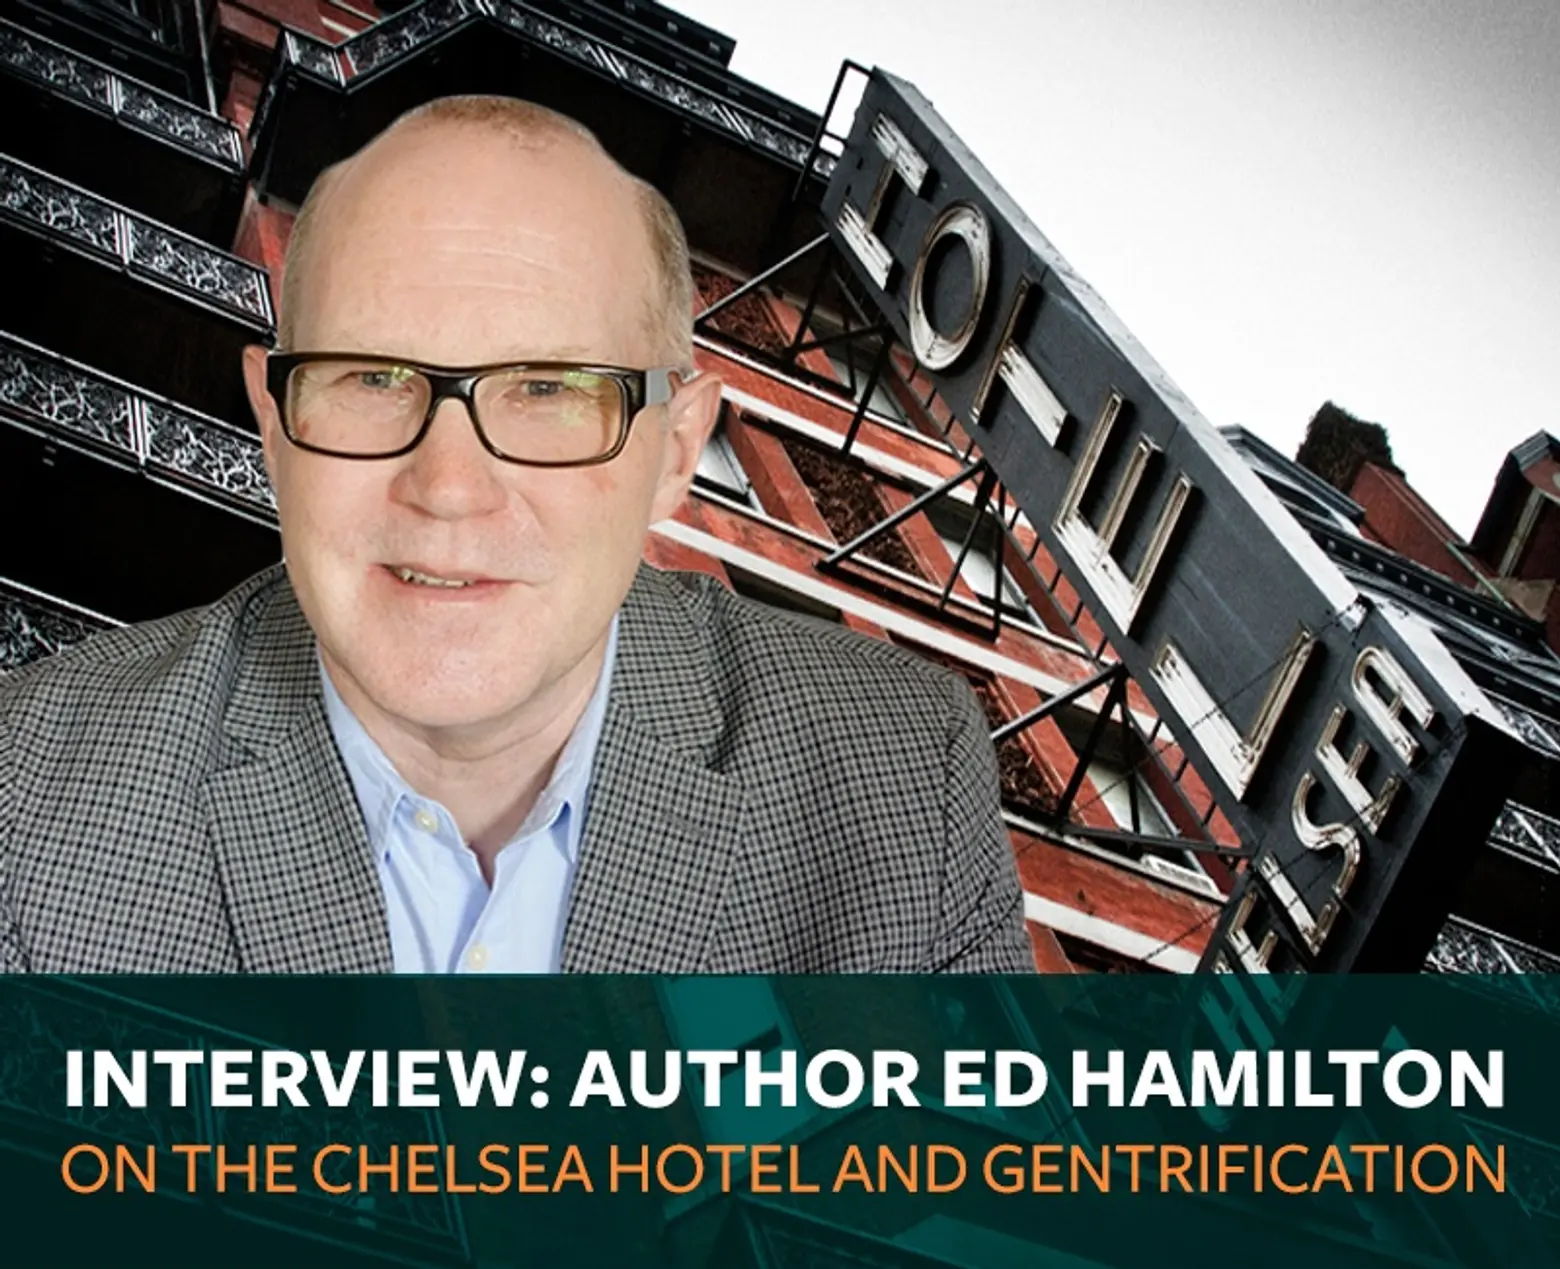 INTERVIEW: Author Ed Hamilton on how the Chelsea Hotel inspired personal stories of gentrification